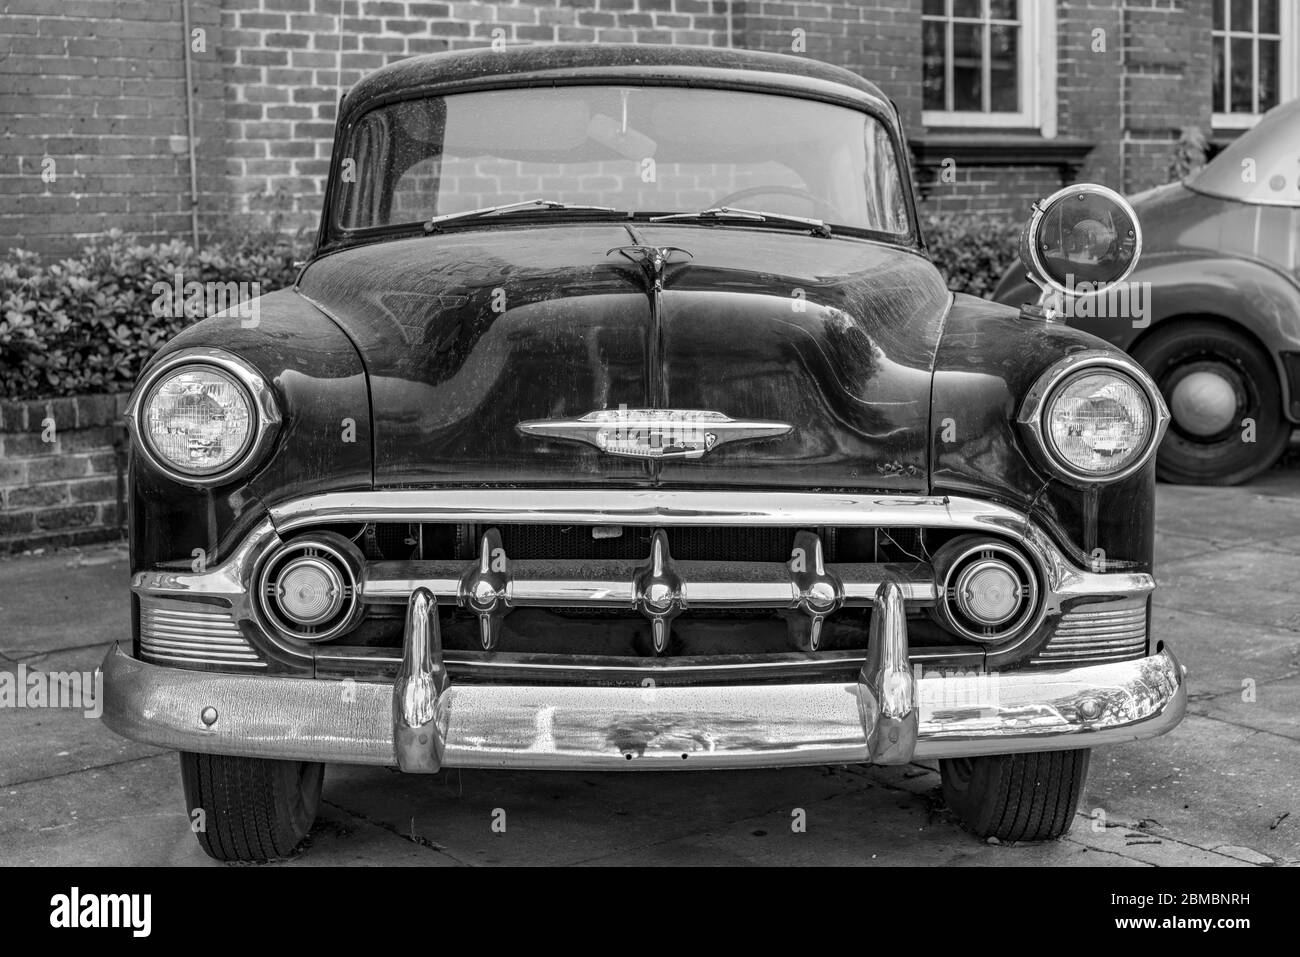 An antique Chevrolet from the 1950's. Stock Photo